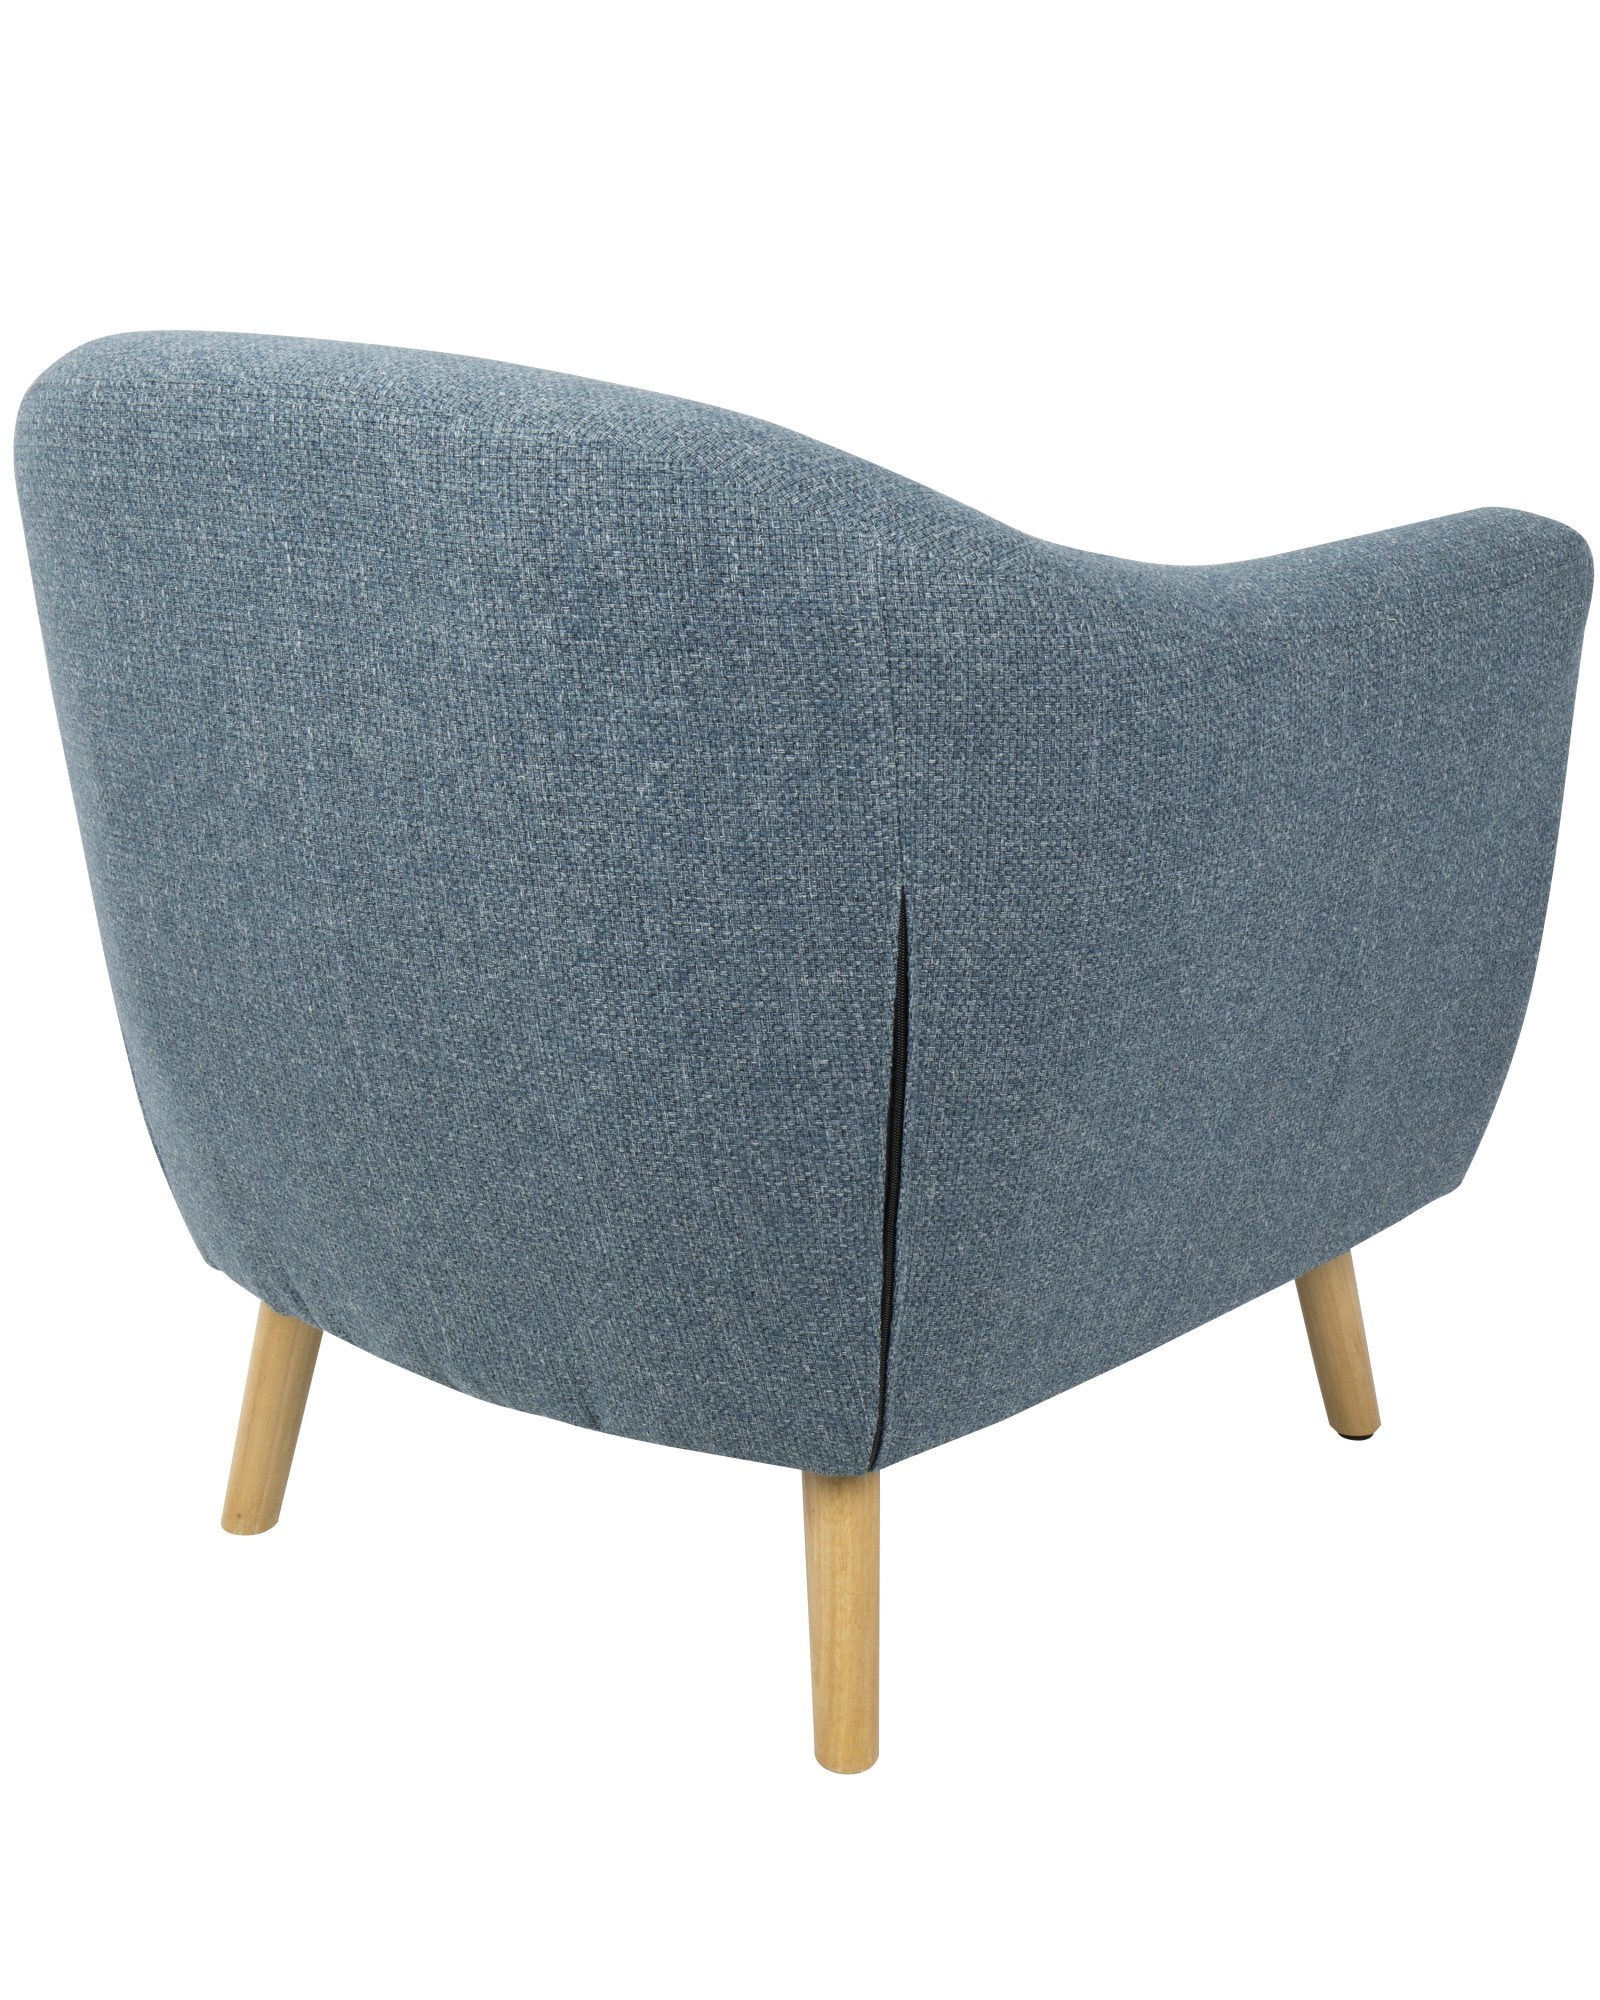 Rockwell Mid-Century Modern Accent Chair with Noise Fabric in Blue